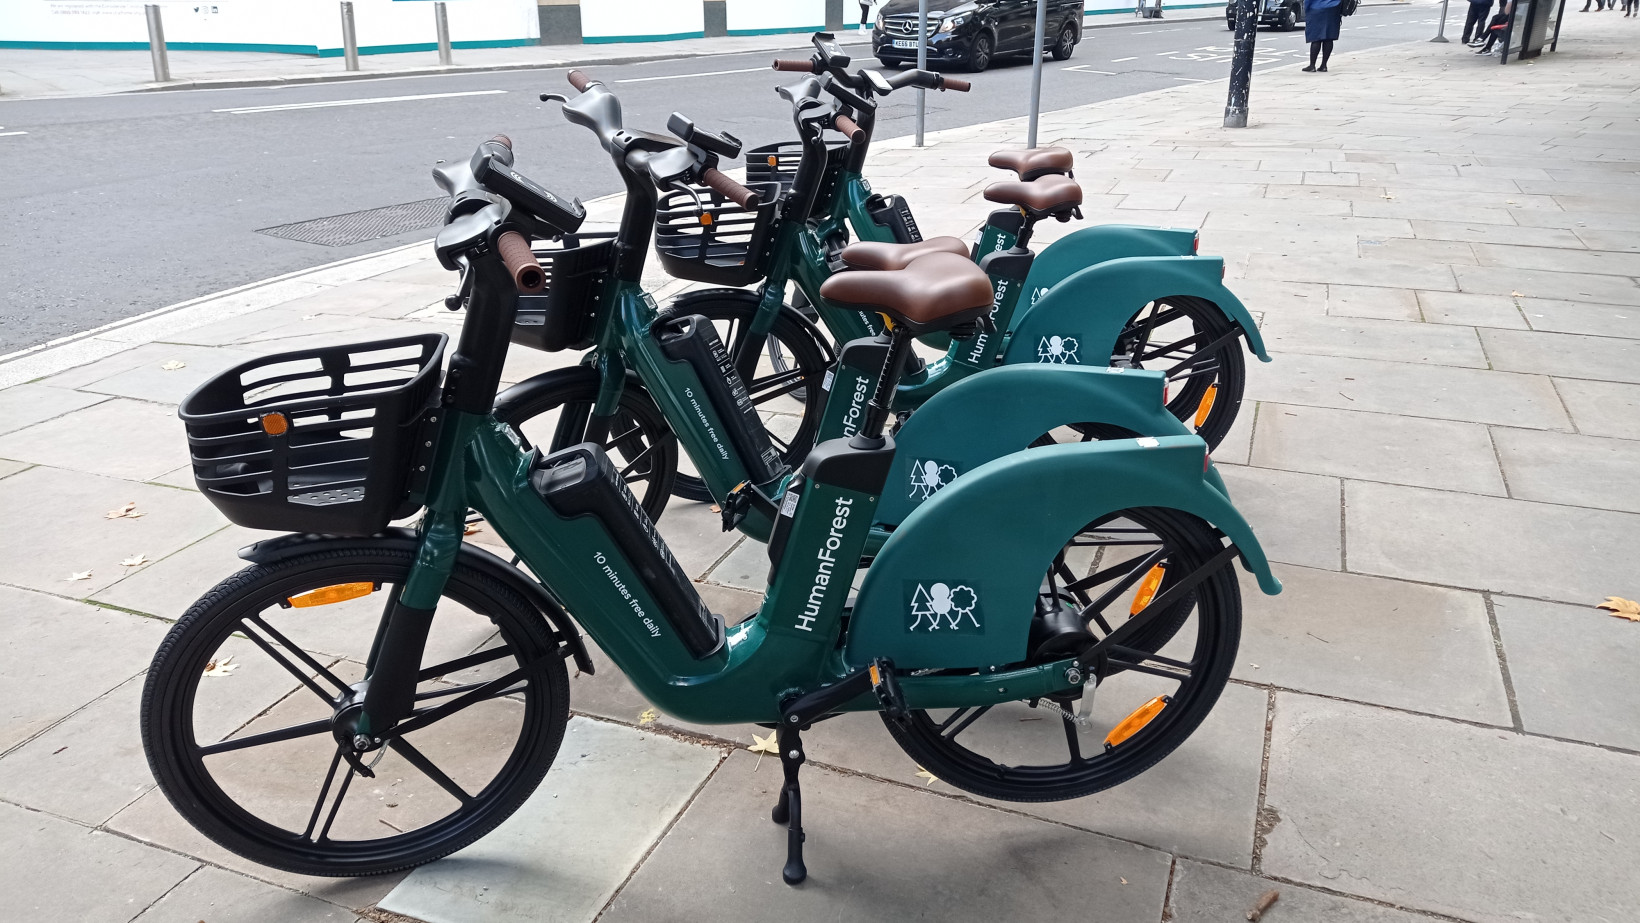 Ebike sharing app Forest rides ad revenue to become ‘cheapest’ in London